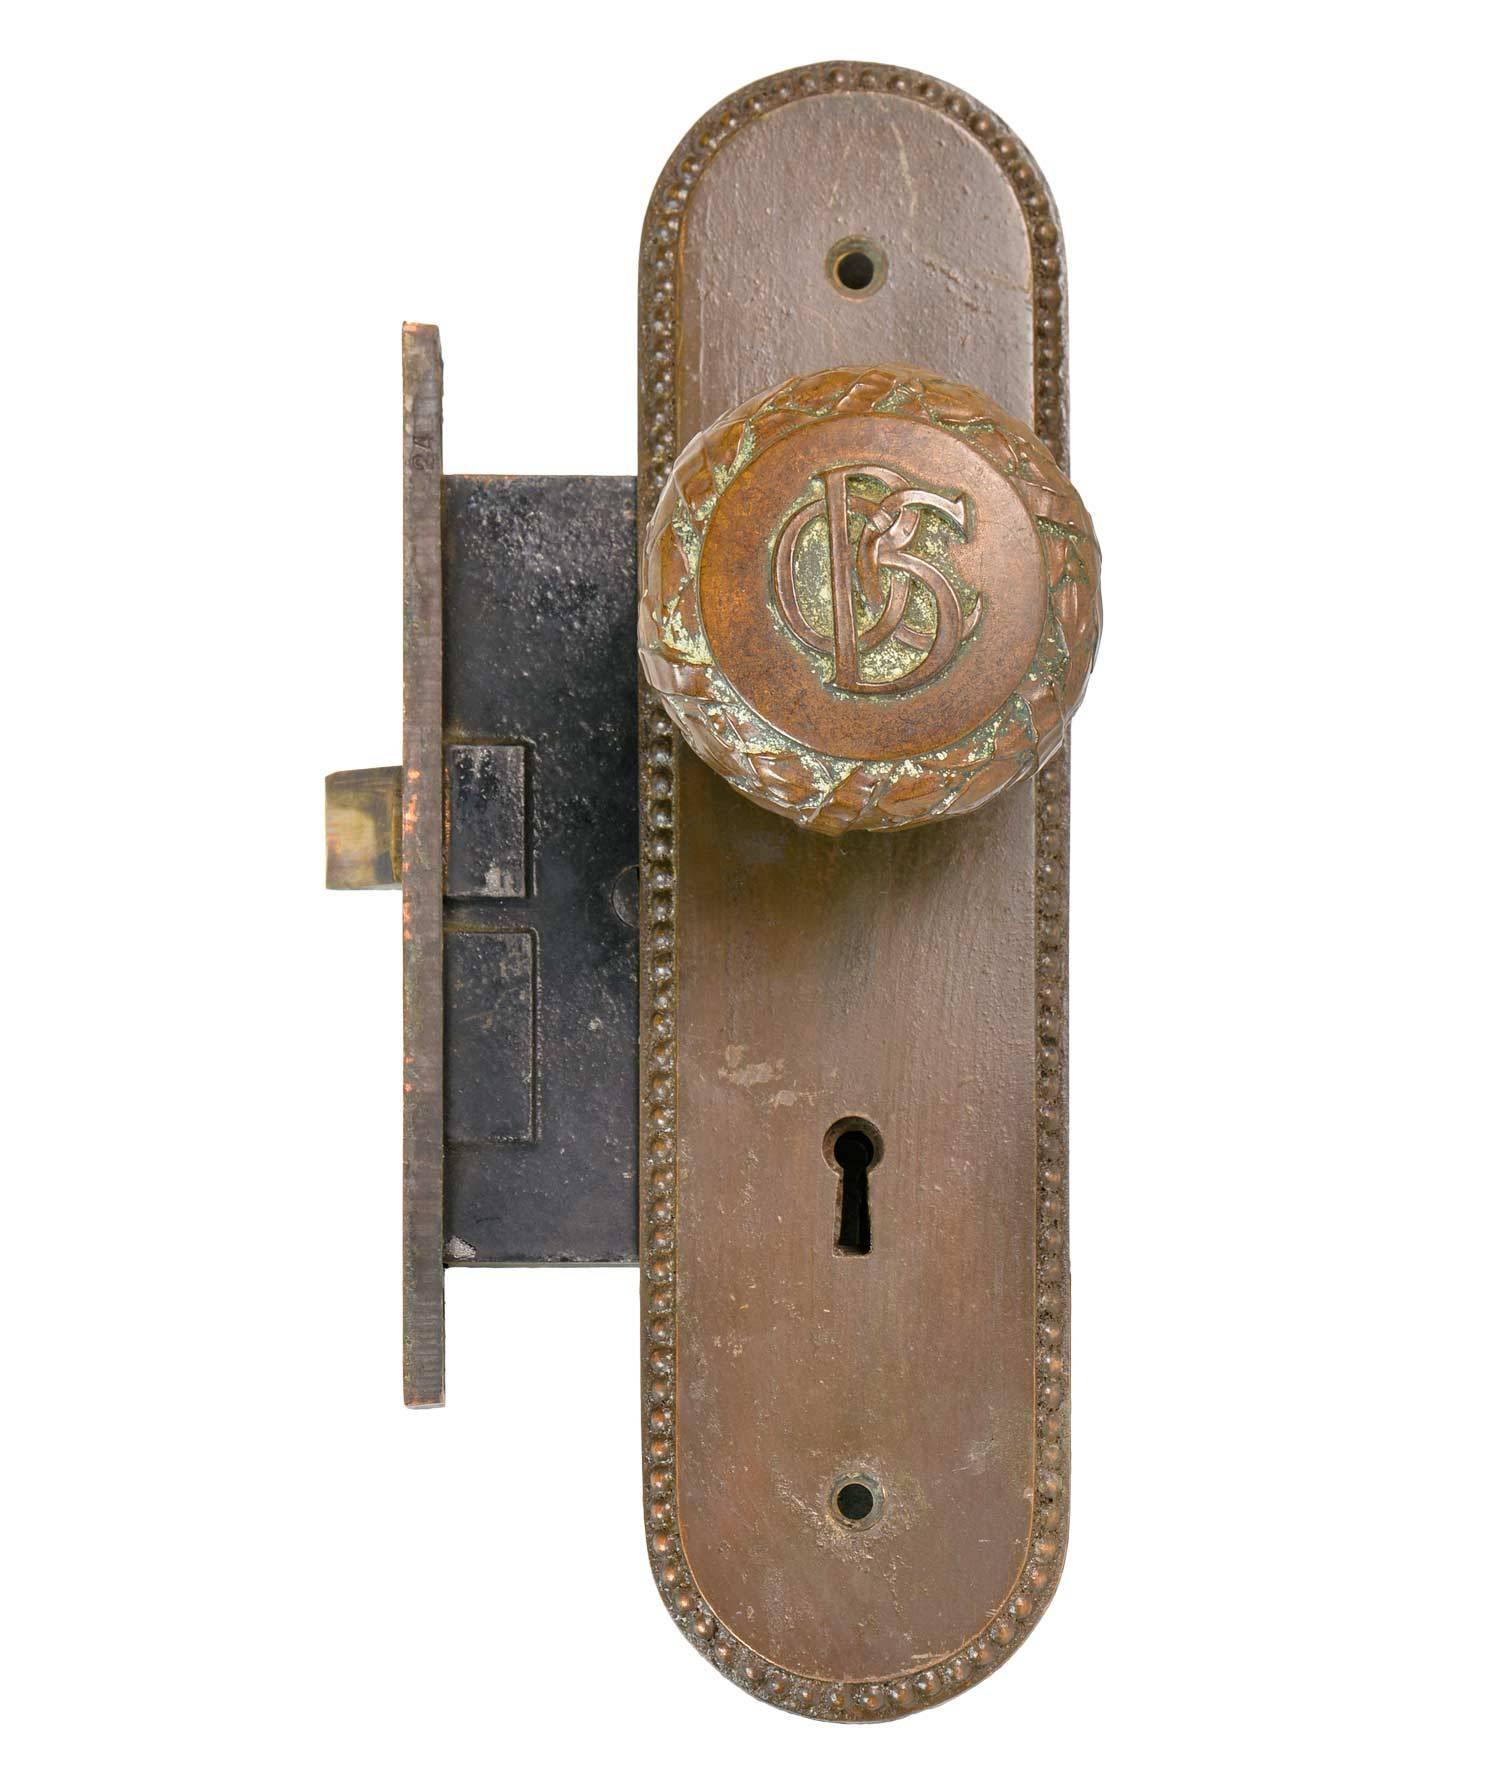 Once the tallest building in Chicago, the landmark building, Old Colony was designed by architecture firm, Holabird & Root. This lovely hardware made by Yale and Towne once graced the doors of this historic treasure in the North Loop. Each set